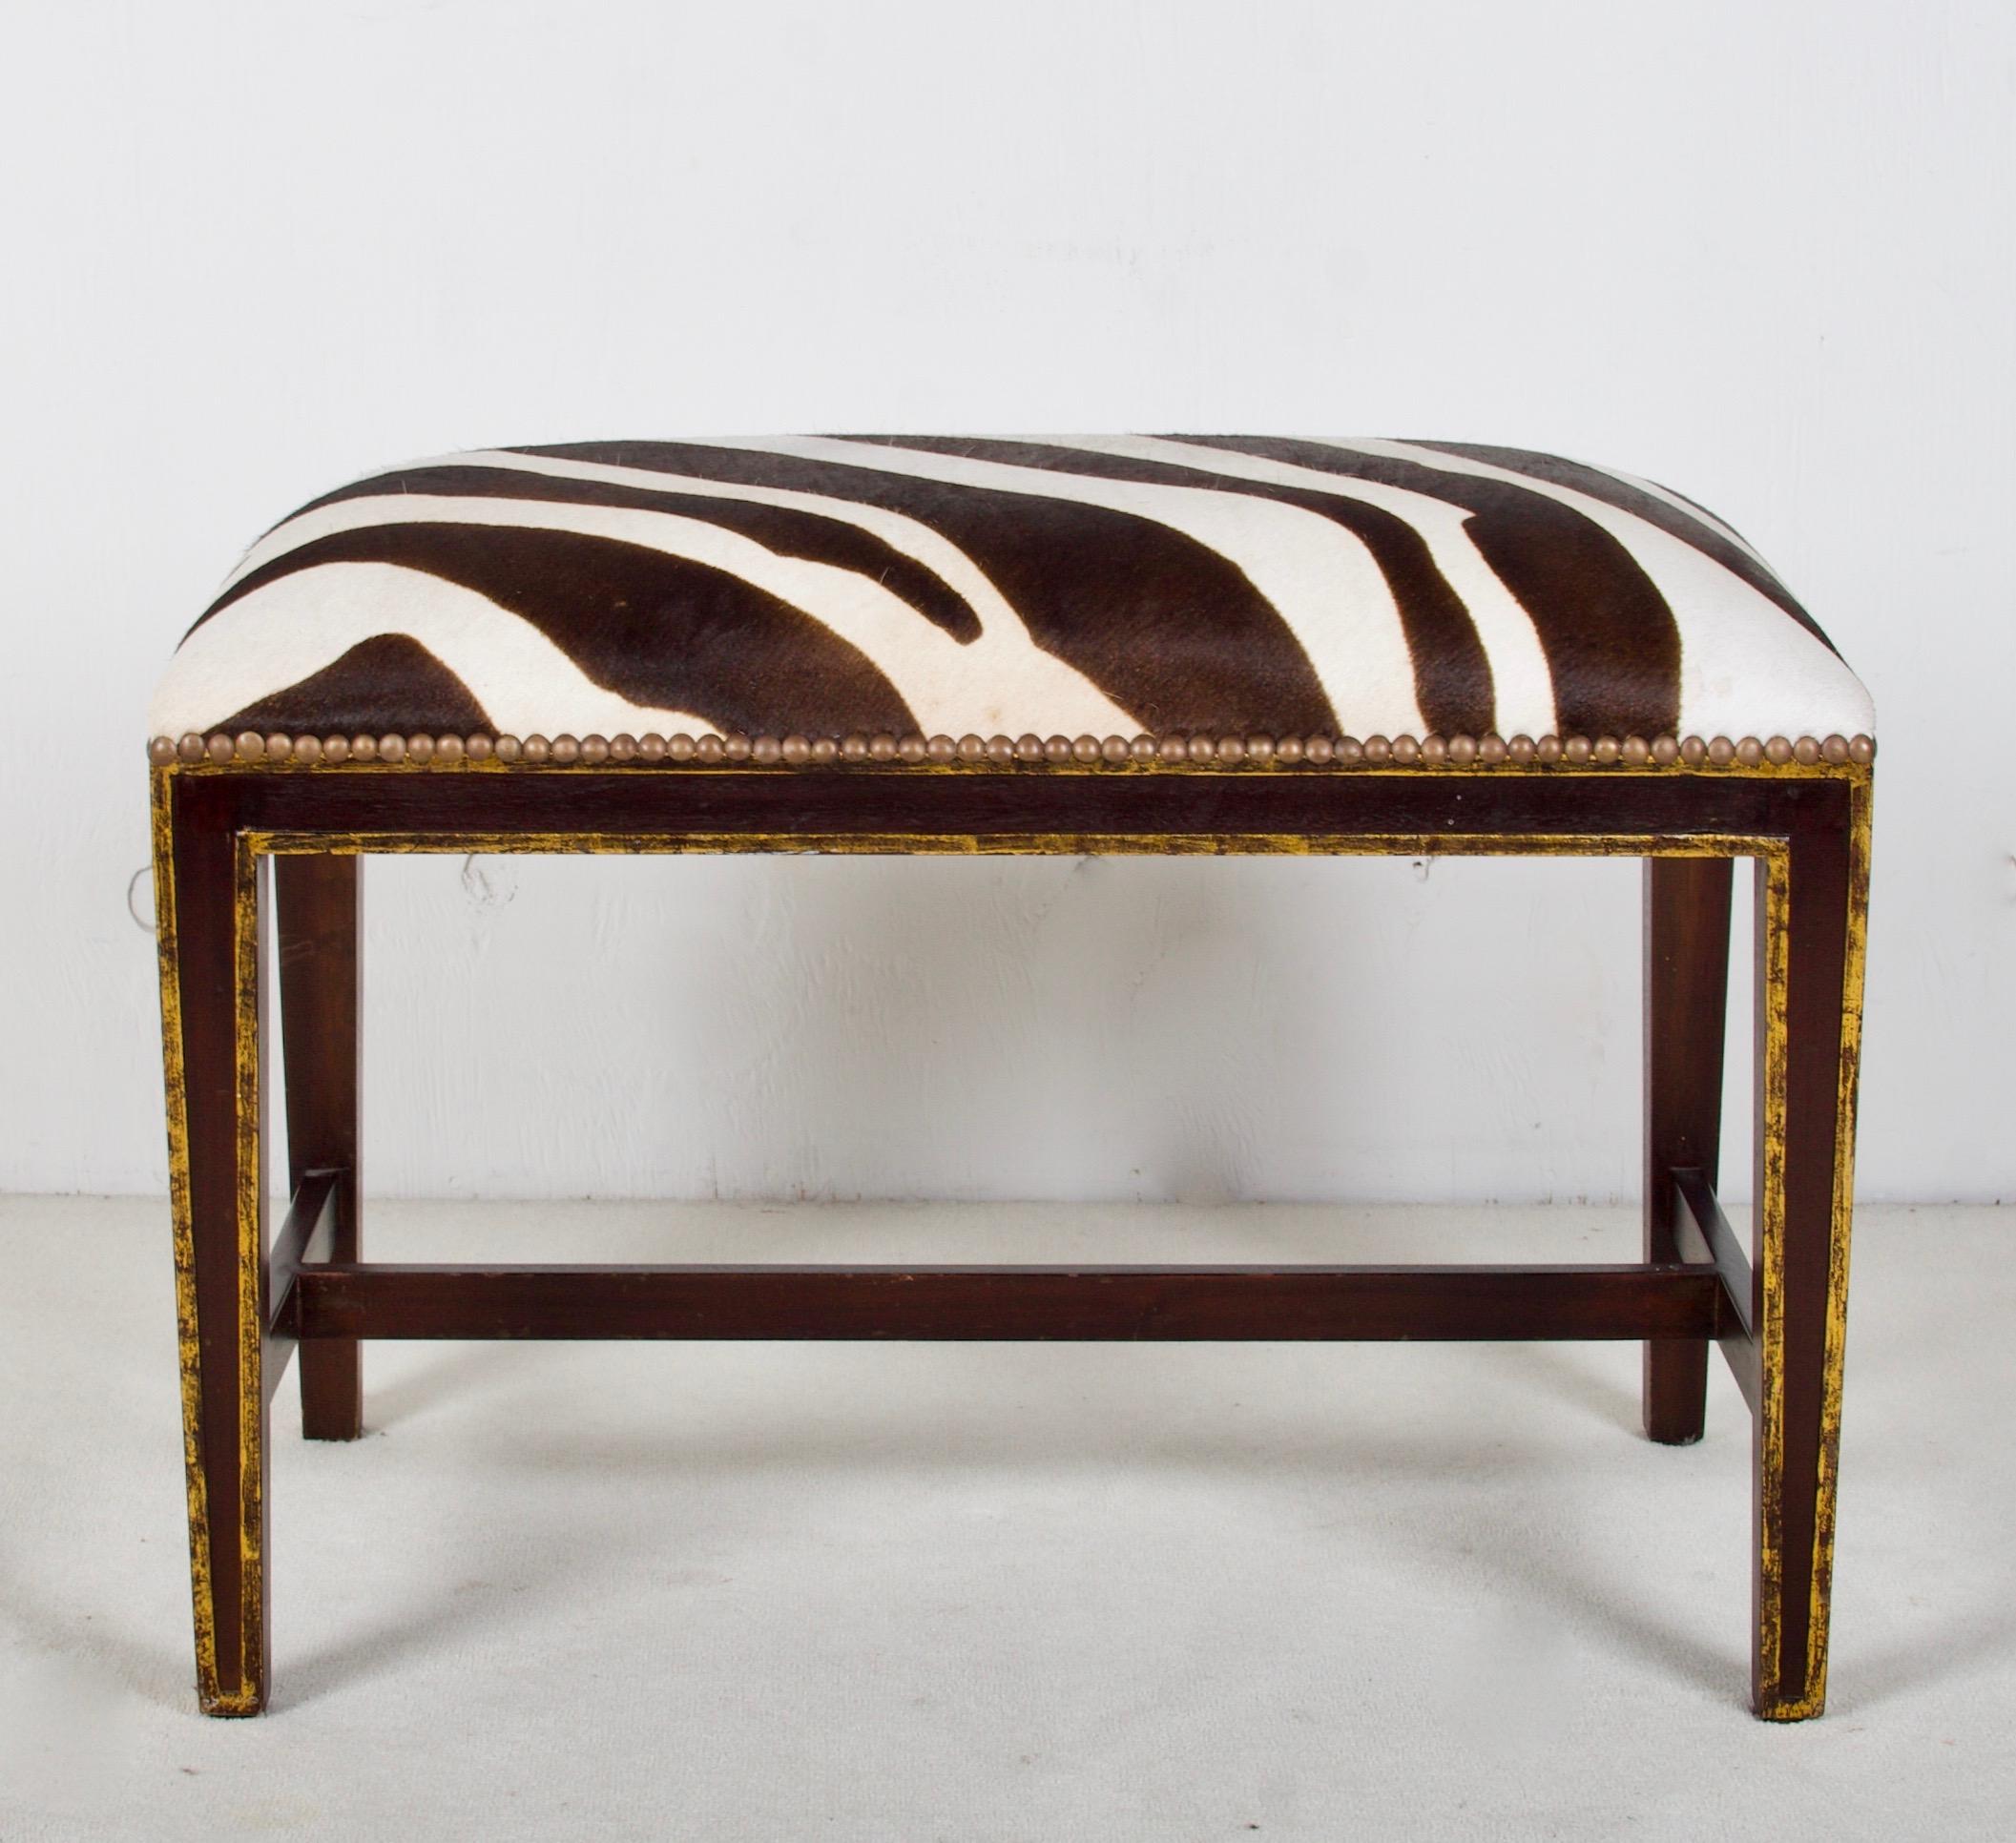 American Classic Style Gilded and Ebonized Bench, Upholstered in Faux Zebra Cowhide